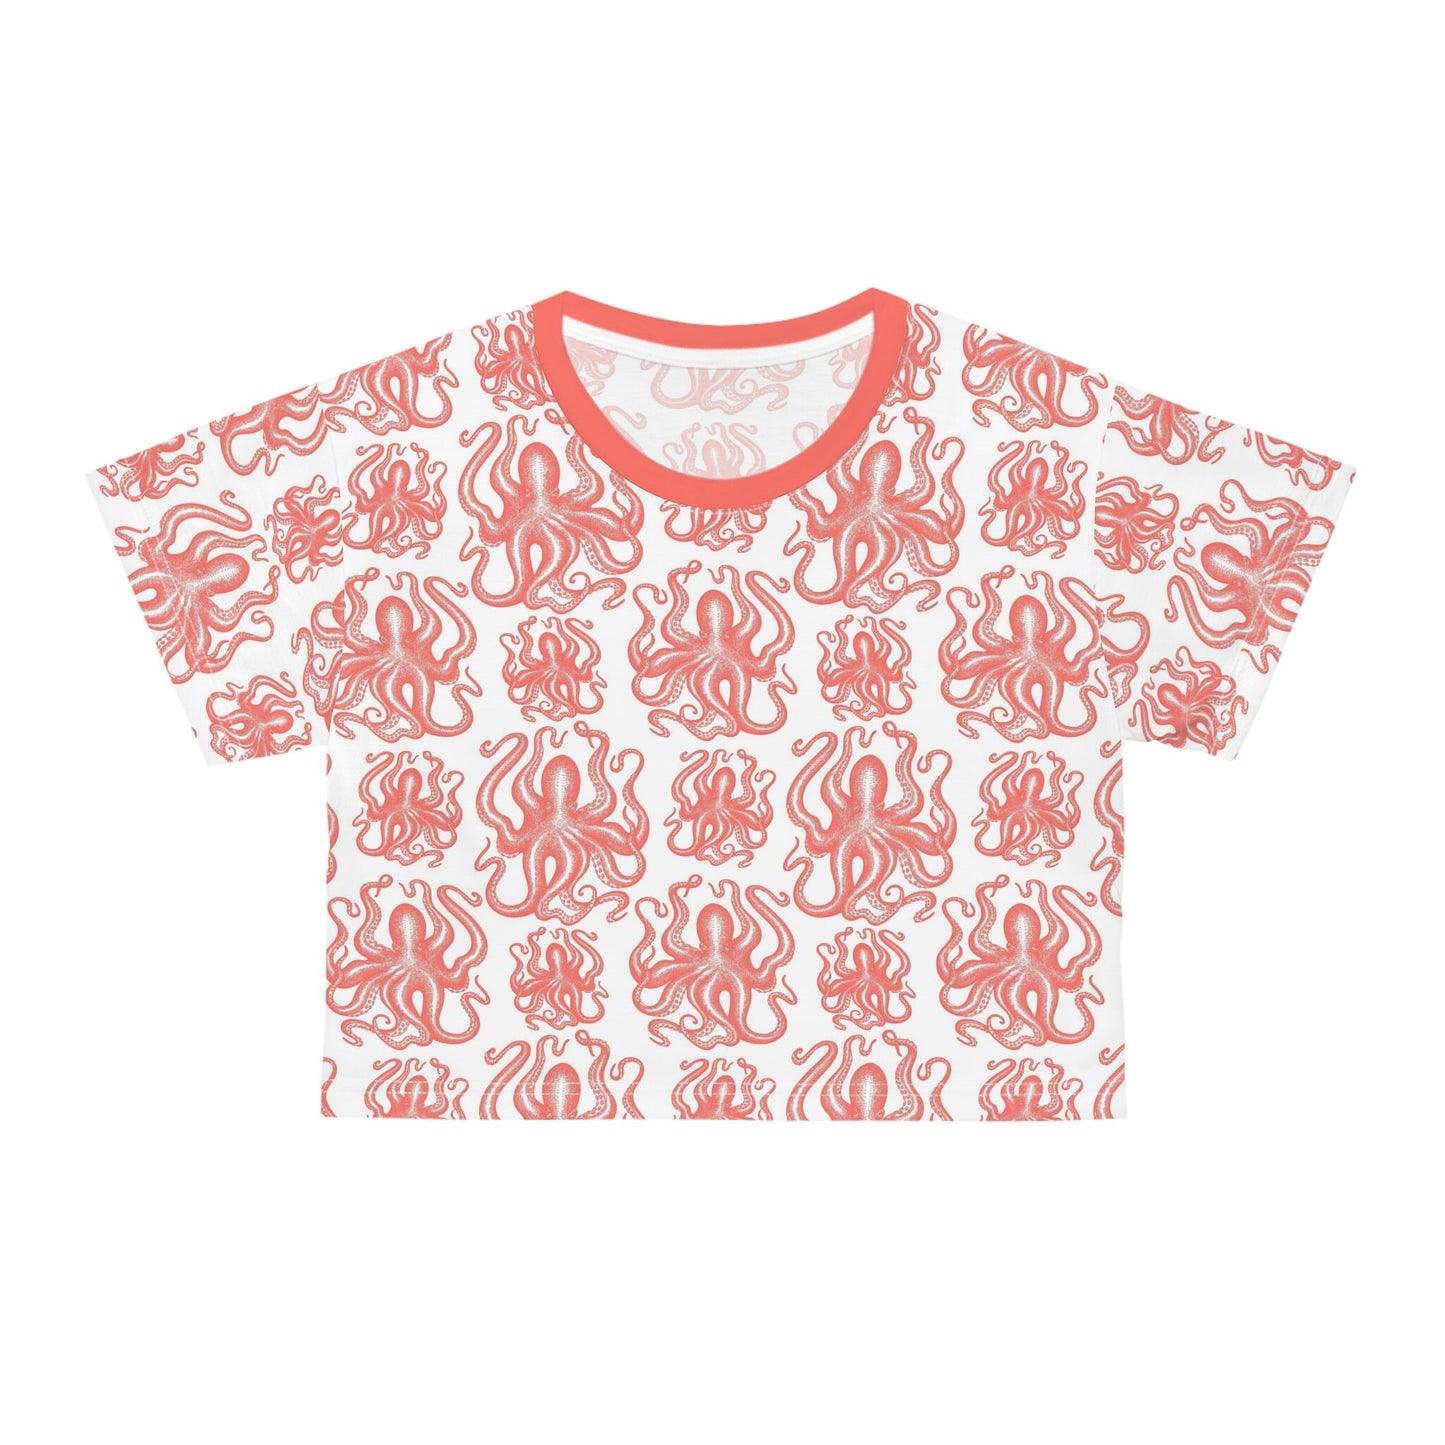 Summer Salmon Octopus Crop Tee - Trendy, Casual, and Comfortable! Crop tee with ocean designs, Fashionable and functional, Octopus Art